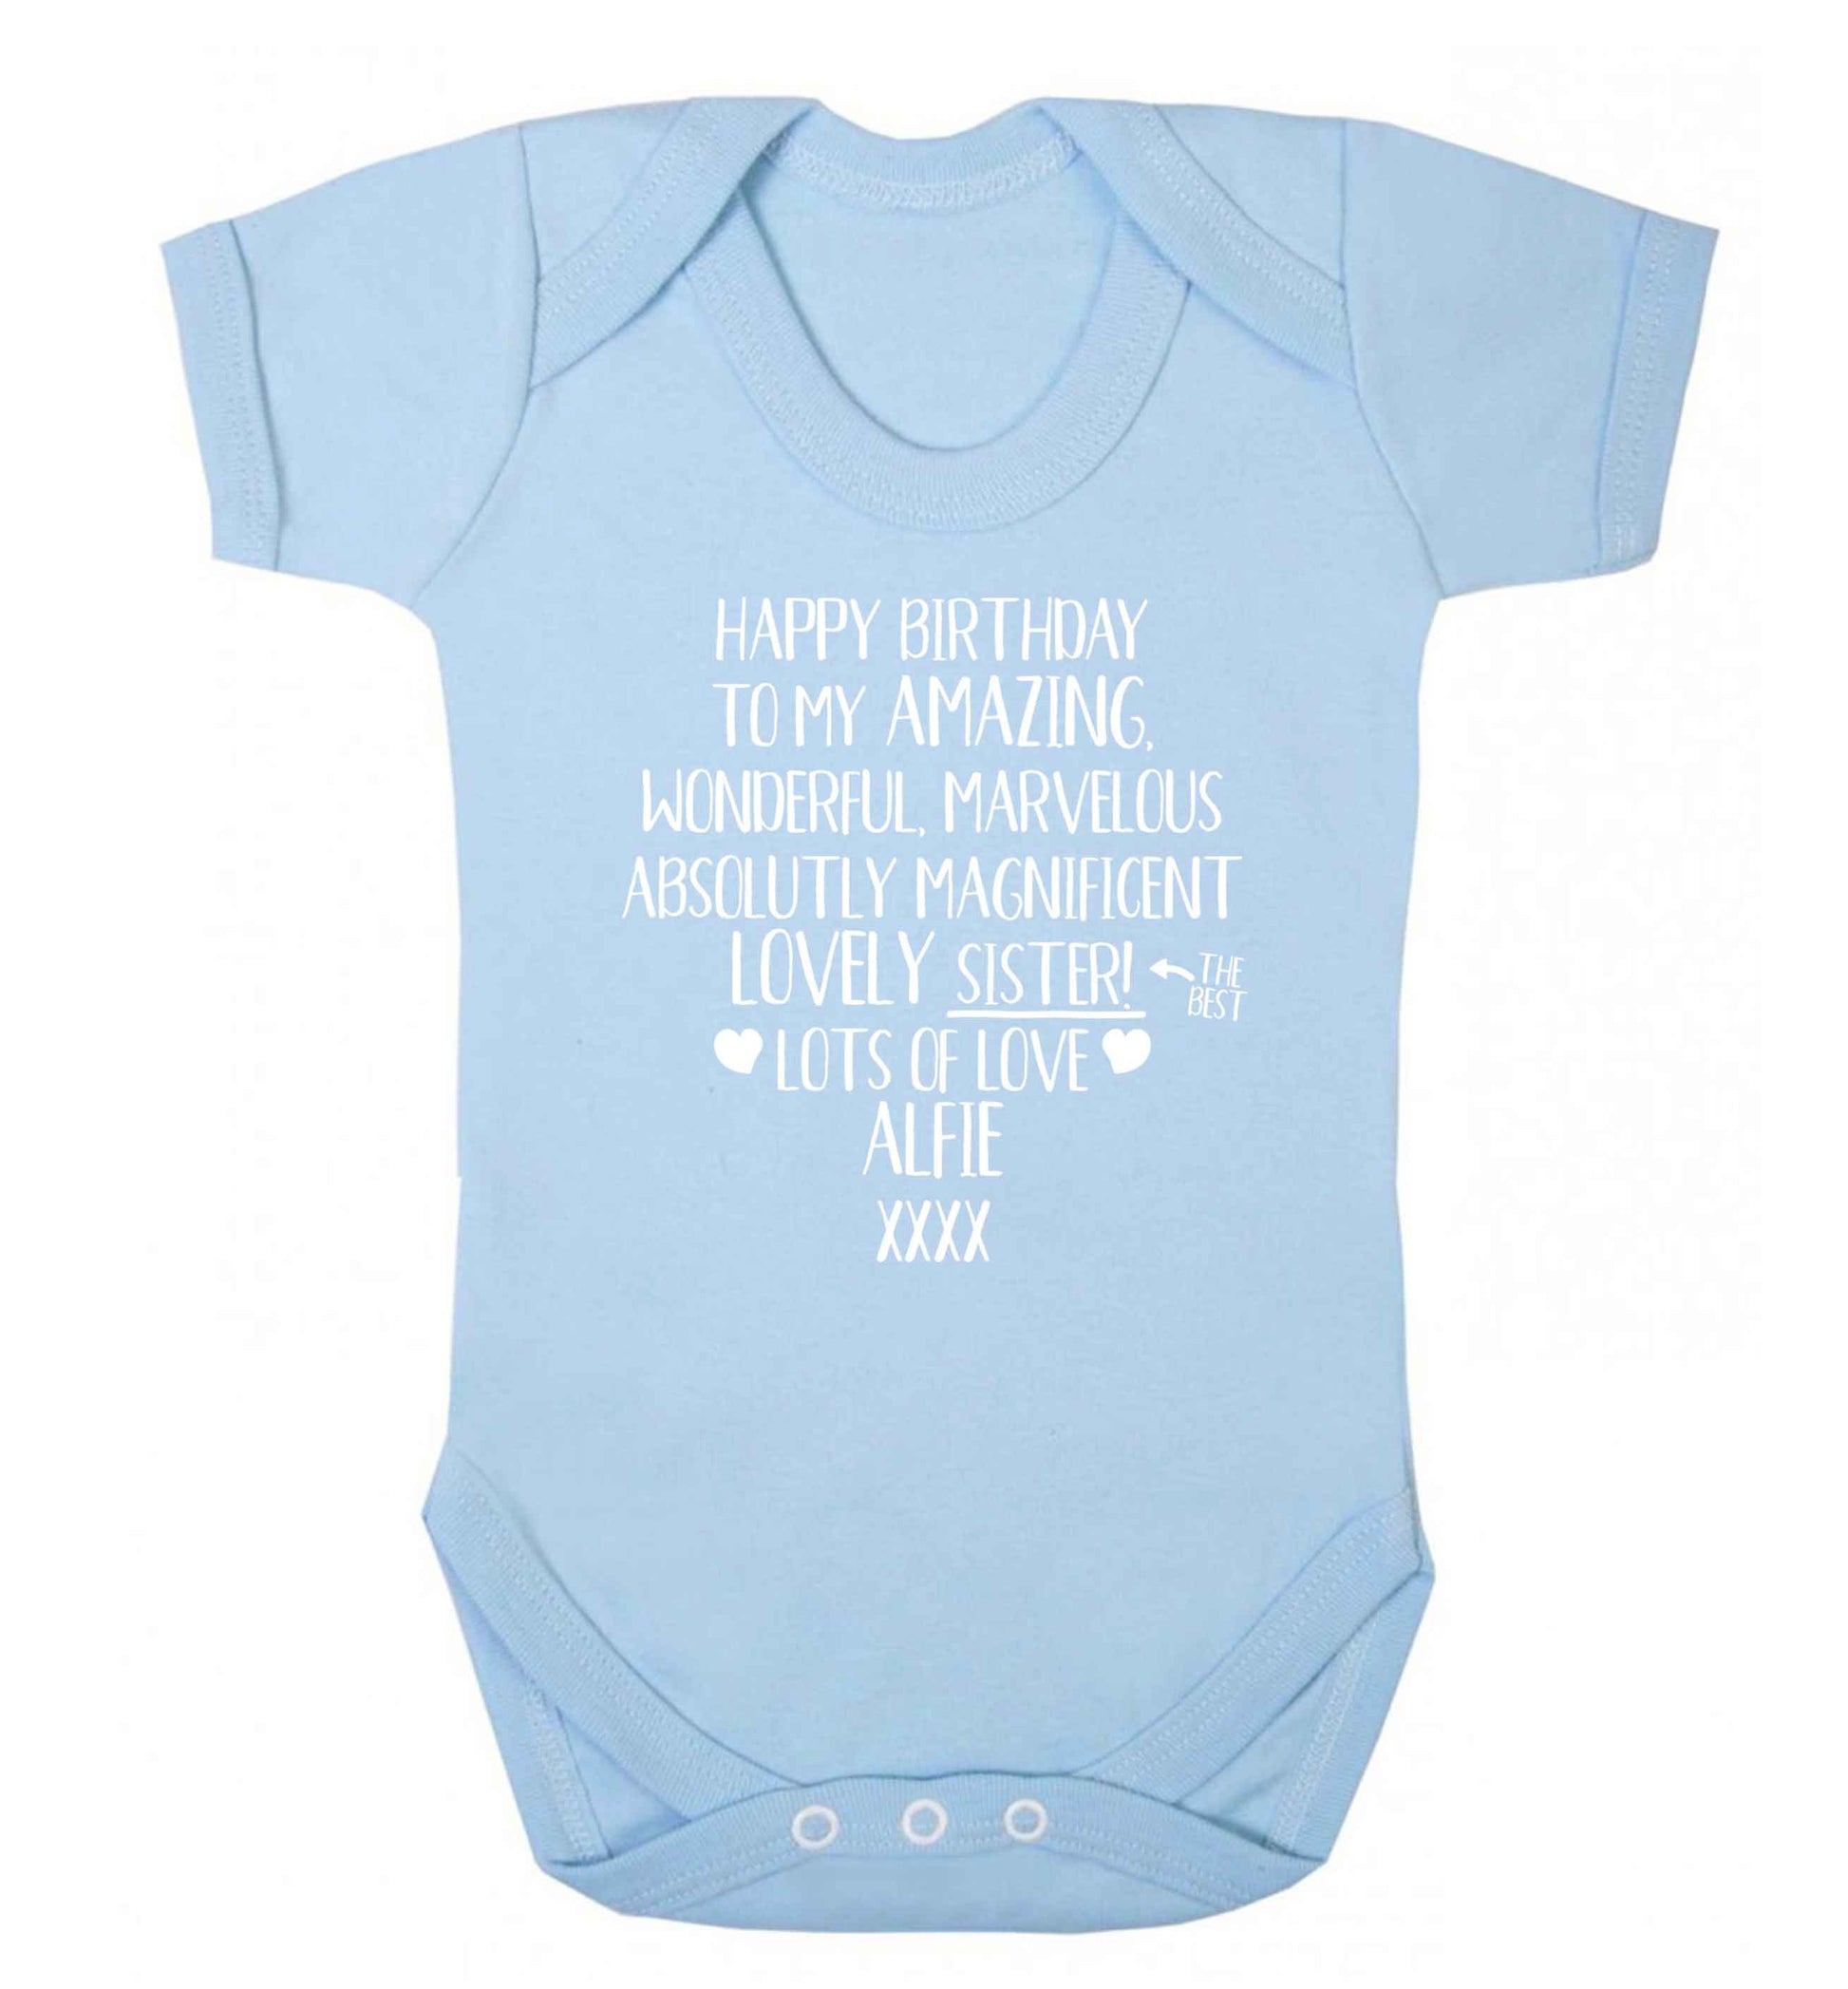 Personalised happy birthday to my amazing, wonderful, lovely sister Baby Vest pale blue 18-24 months